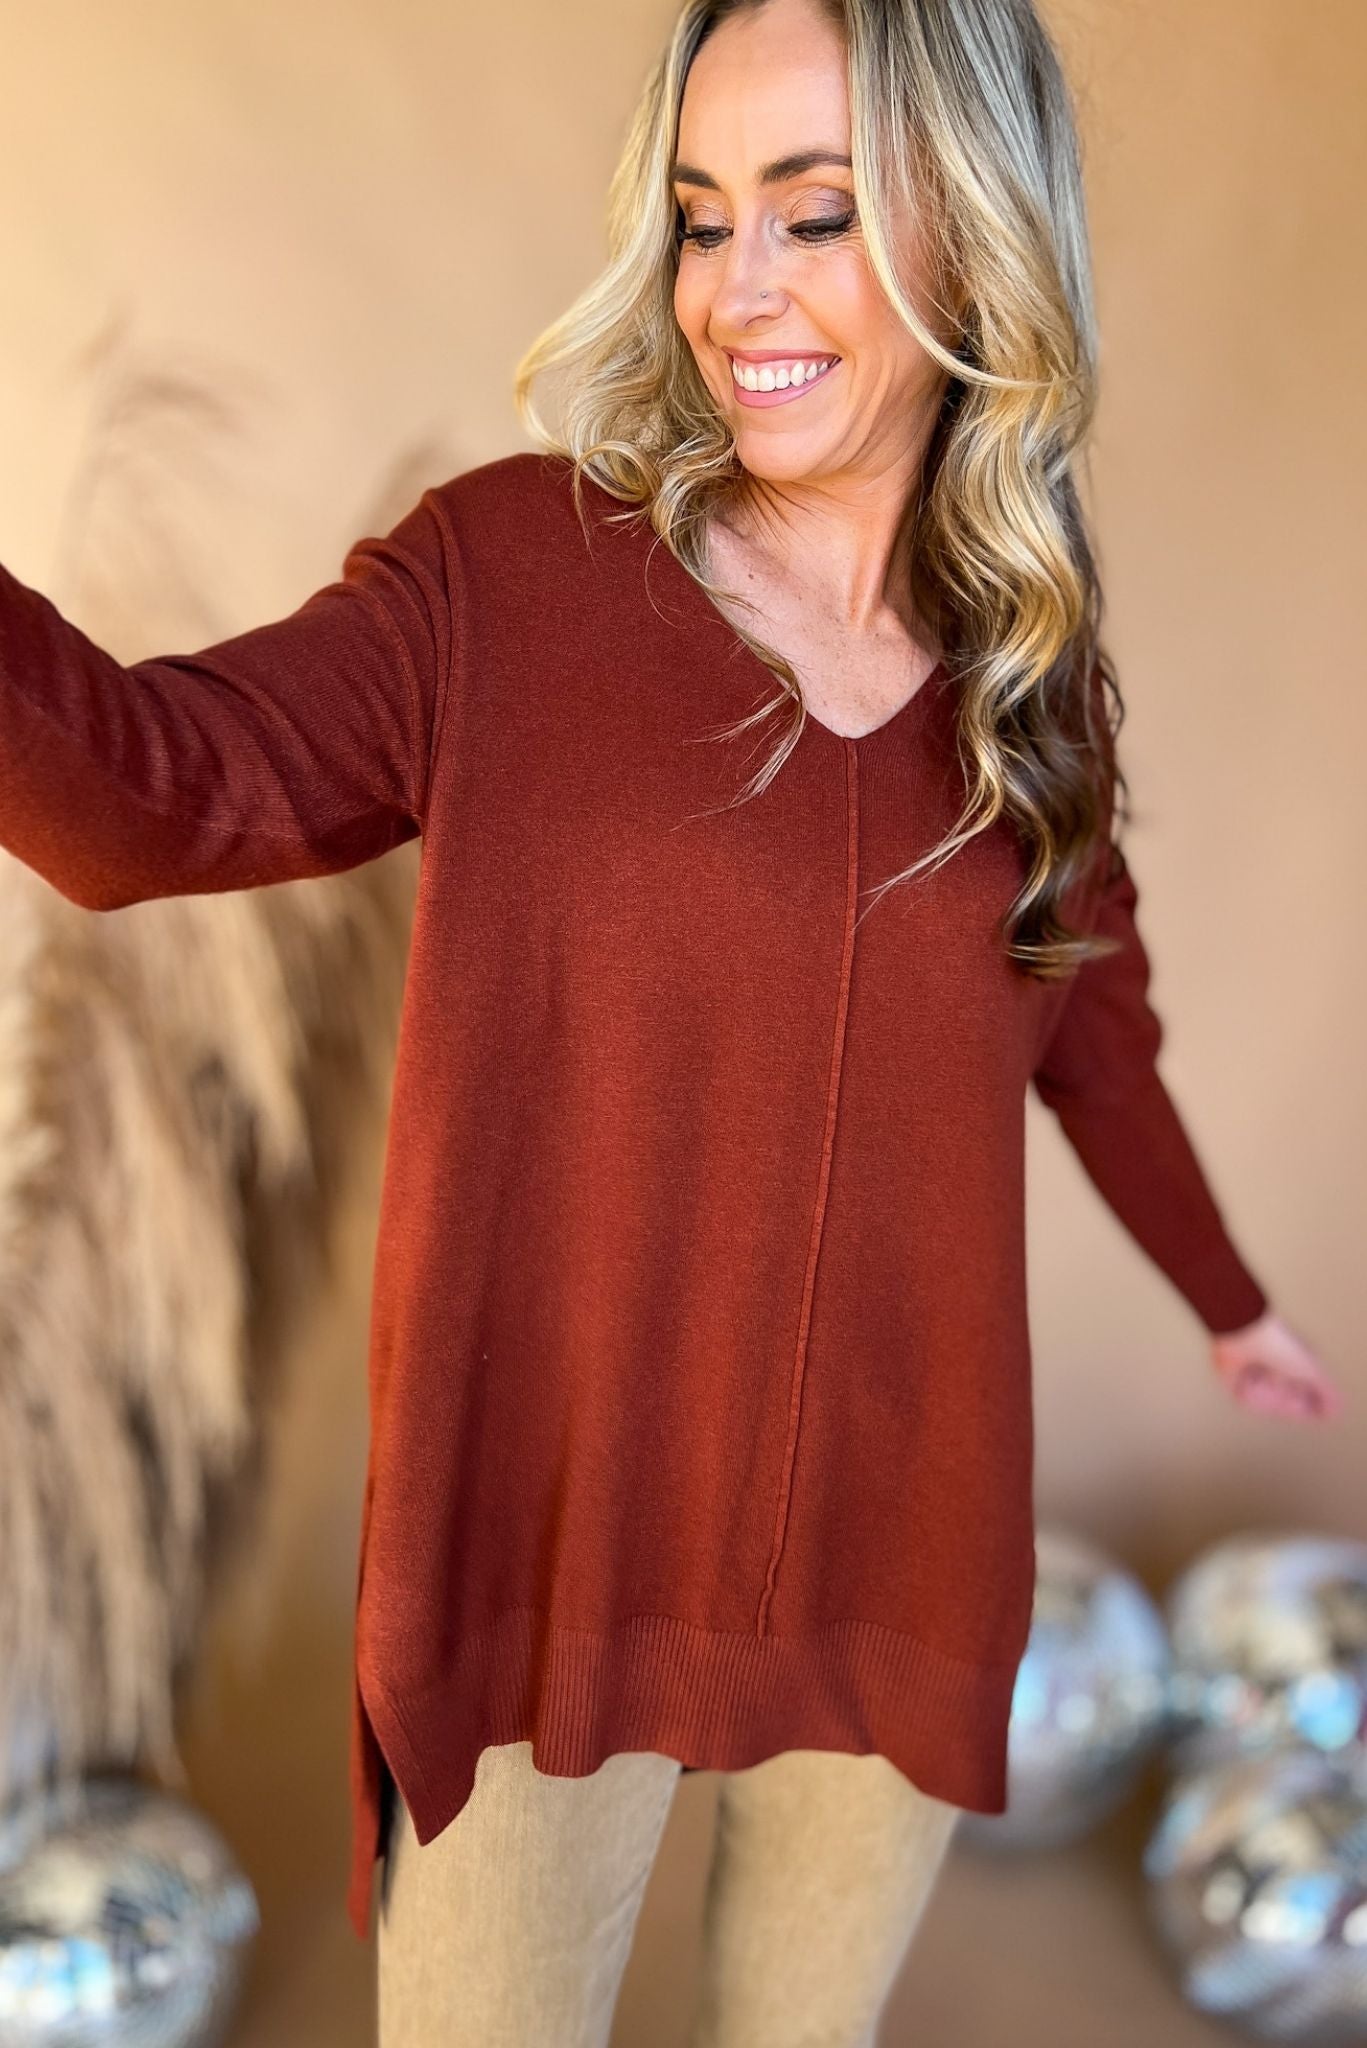 Load image into Gallery viewer, Dark Rust V Neck Front Seam Side Slit Sweater, everyday sweater, must have, front seam detail, mom style, elevated look, shop style your senses by mallory fitzsimmons
